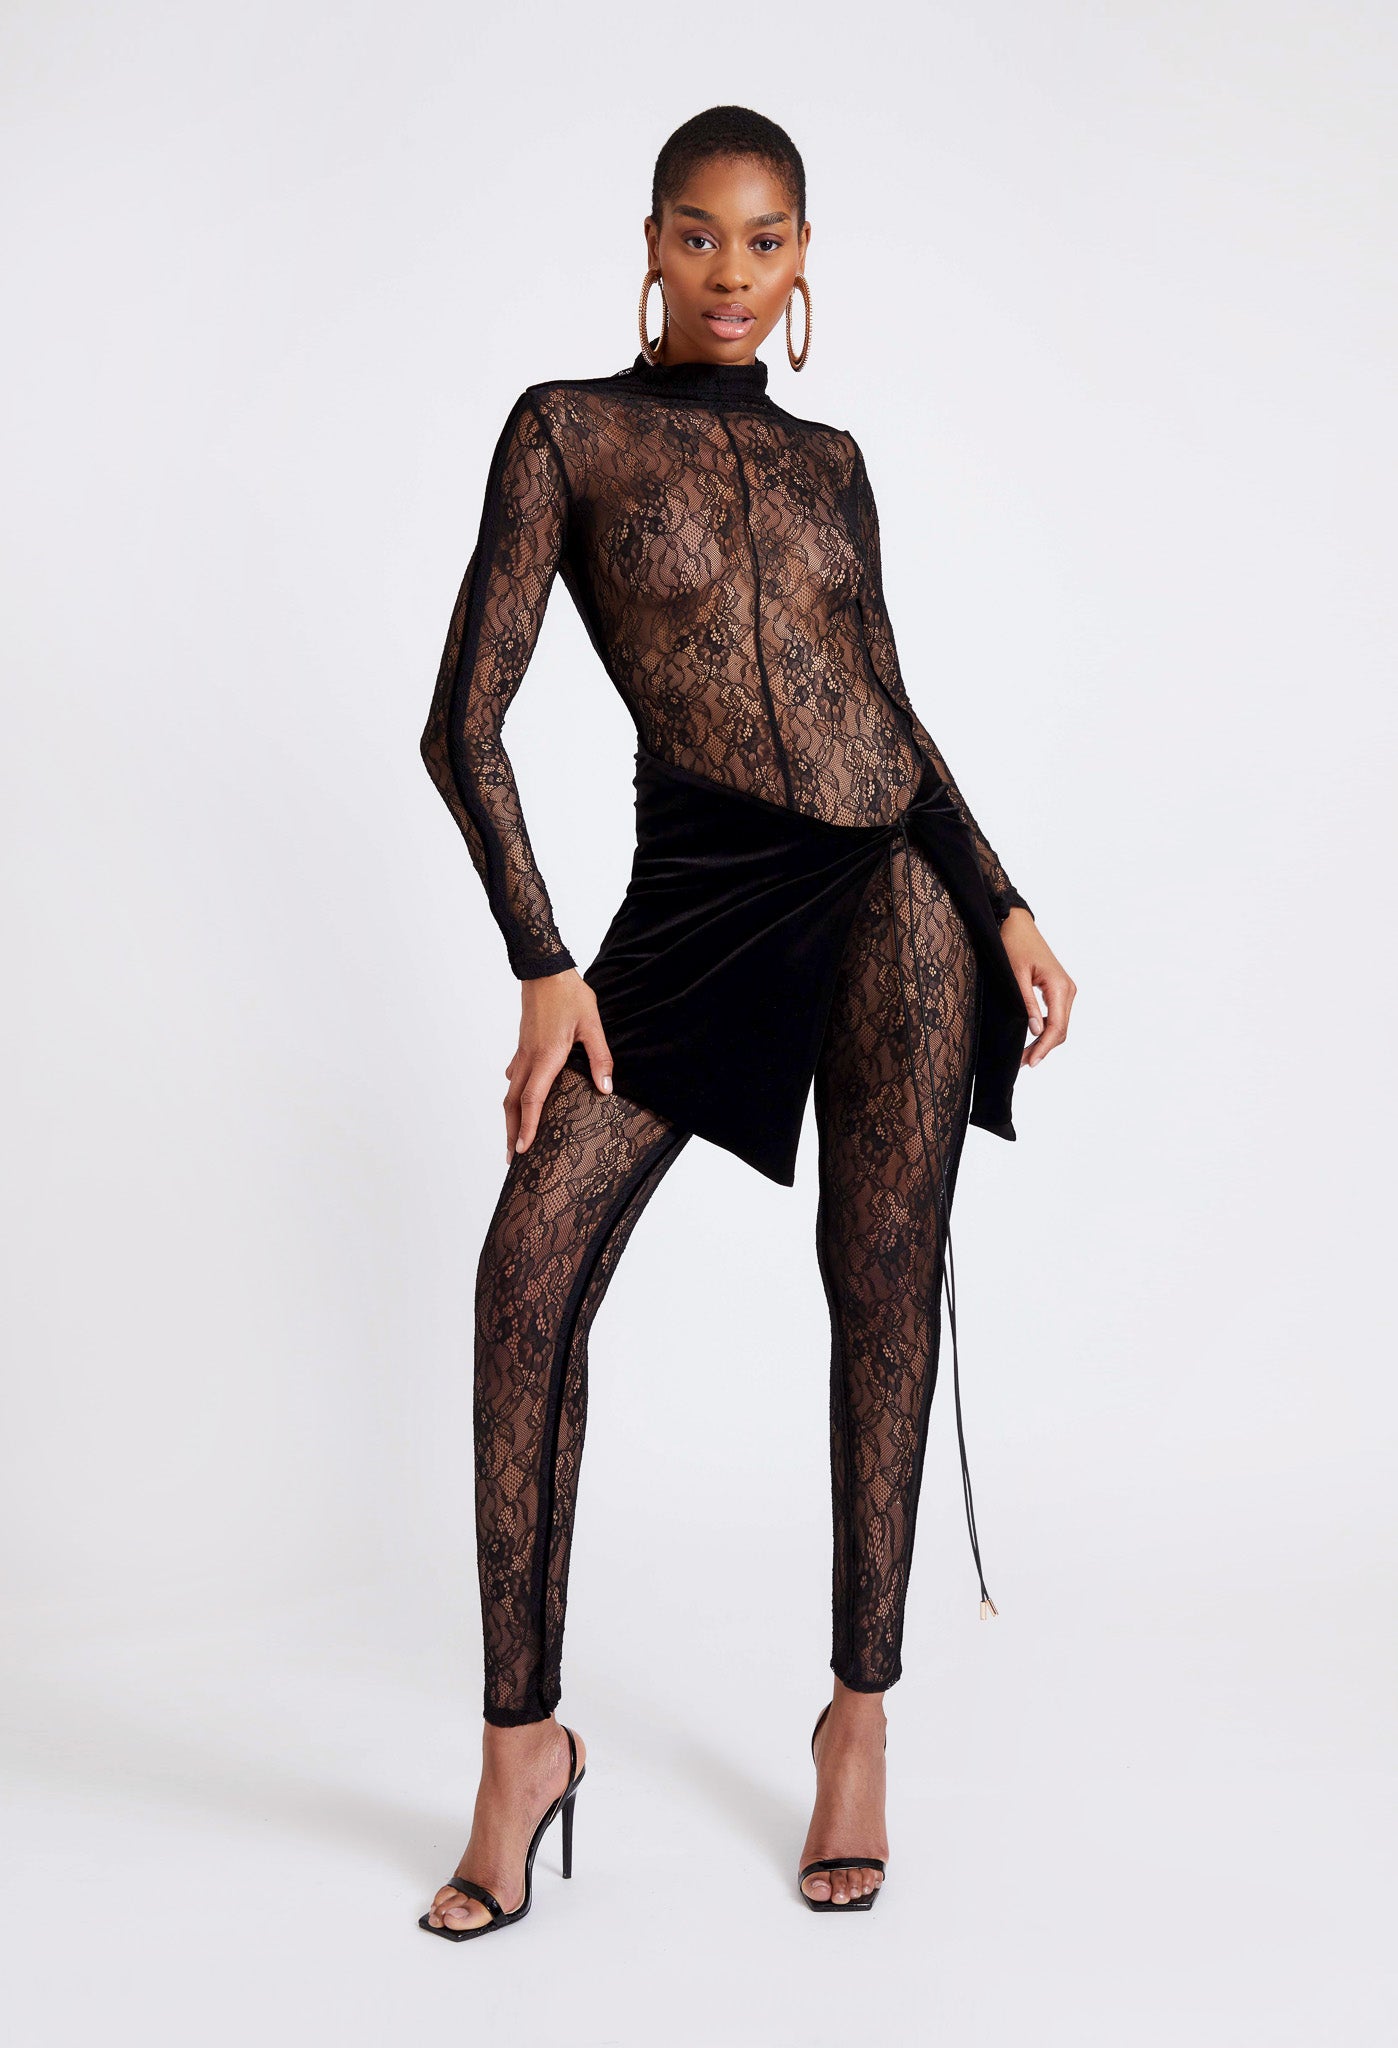 Laced Bodee Catsuit - Panther